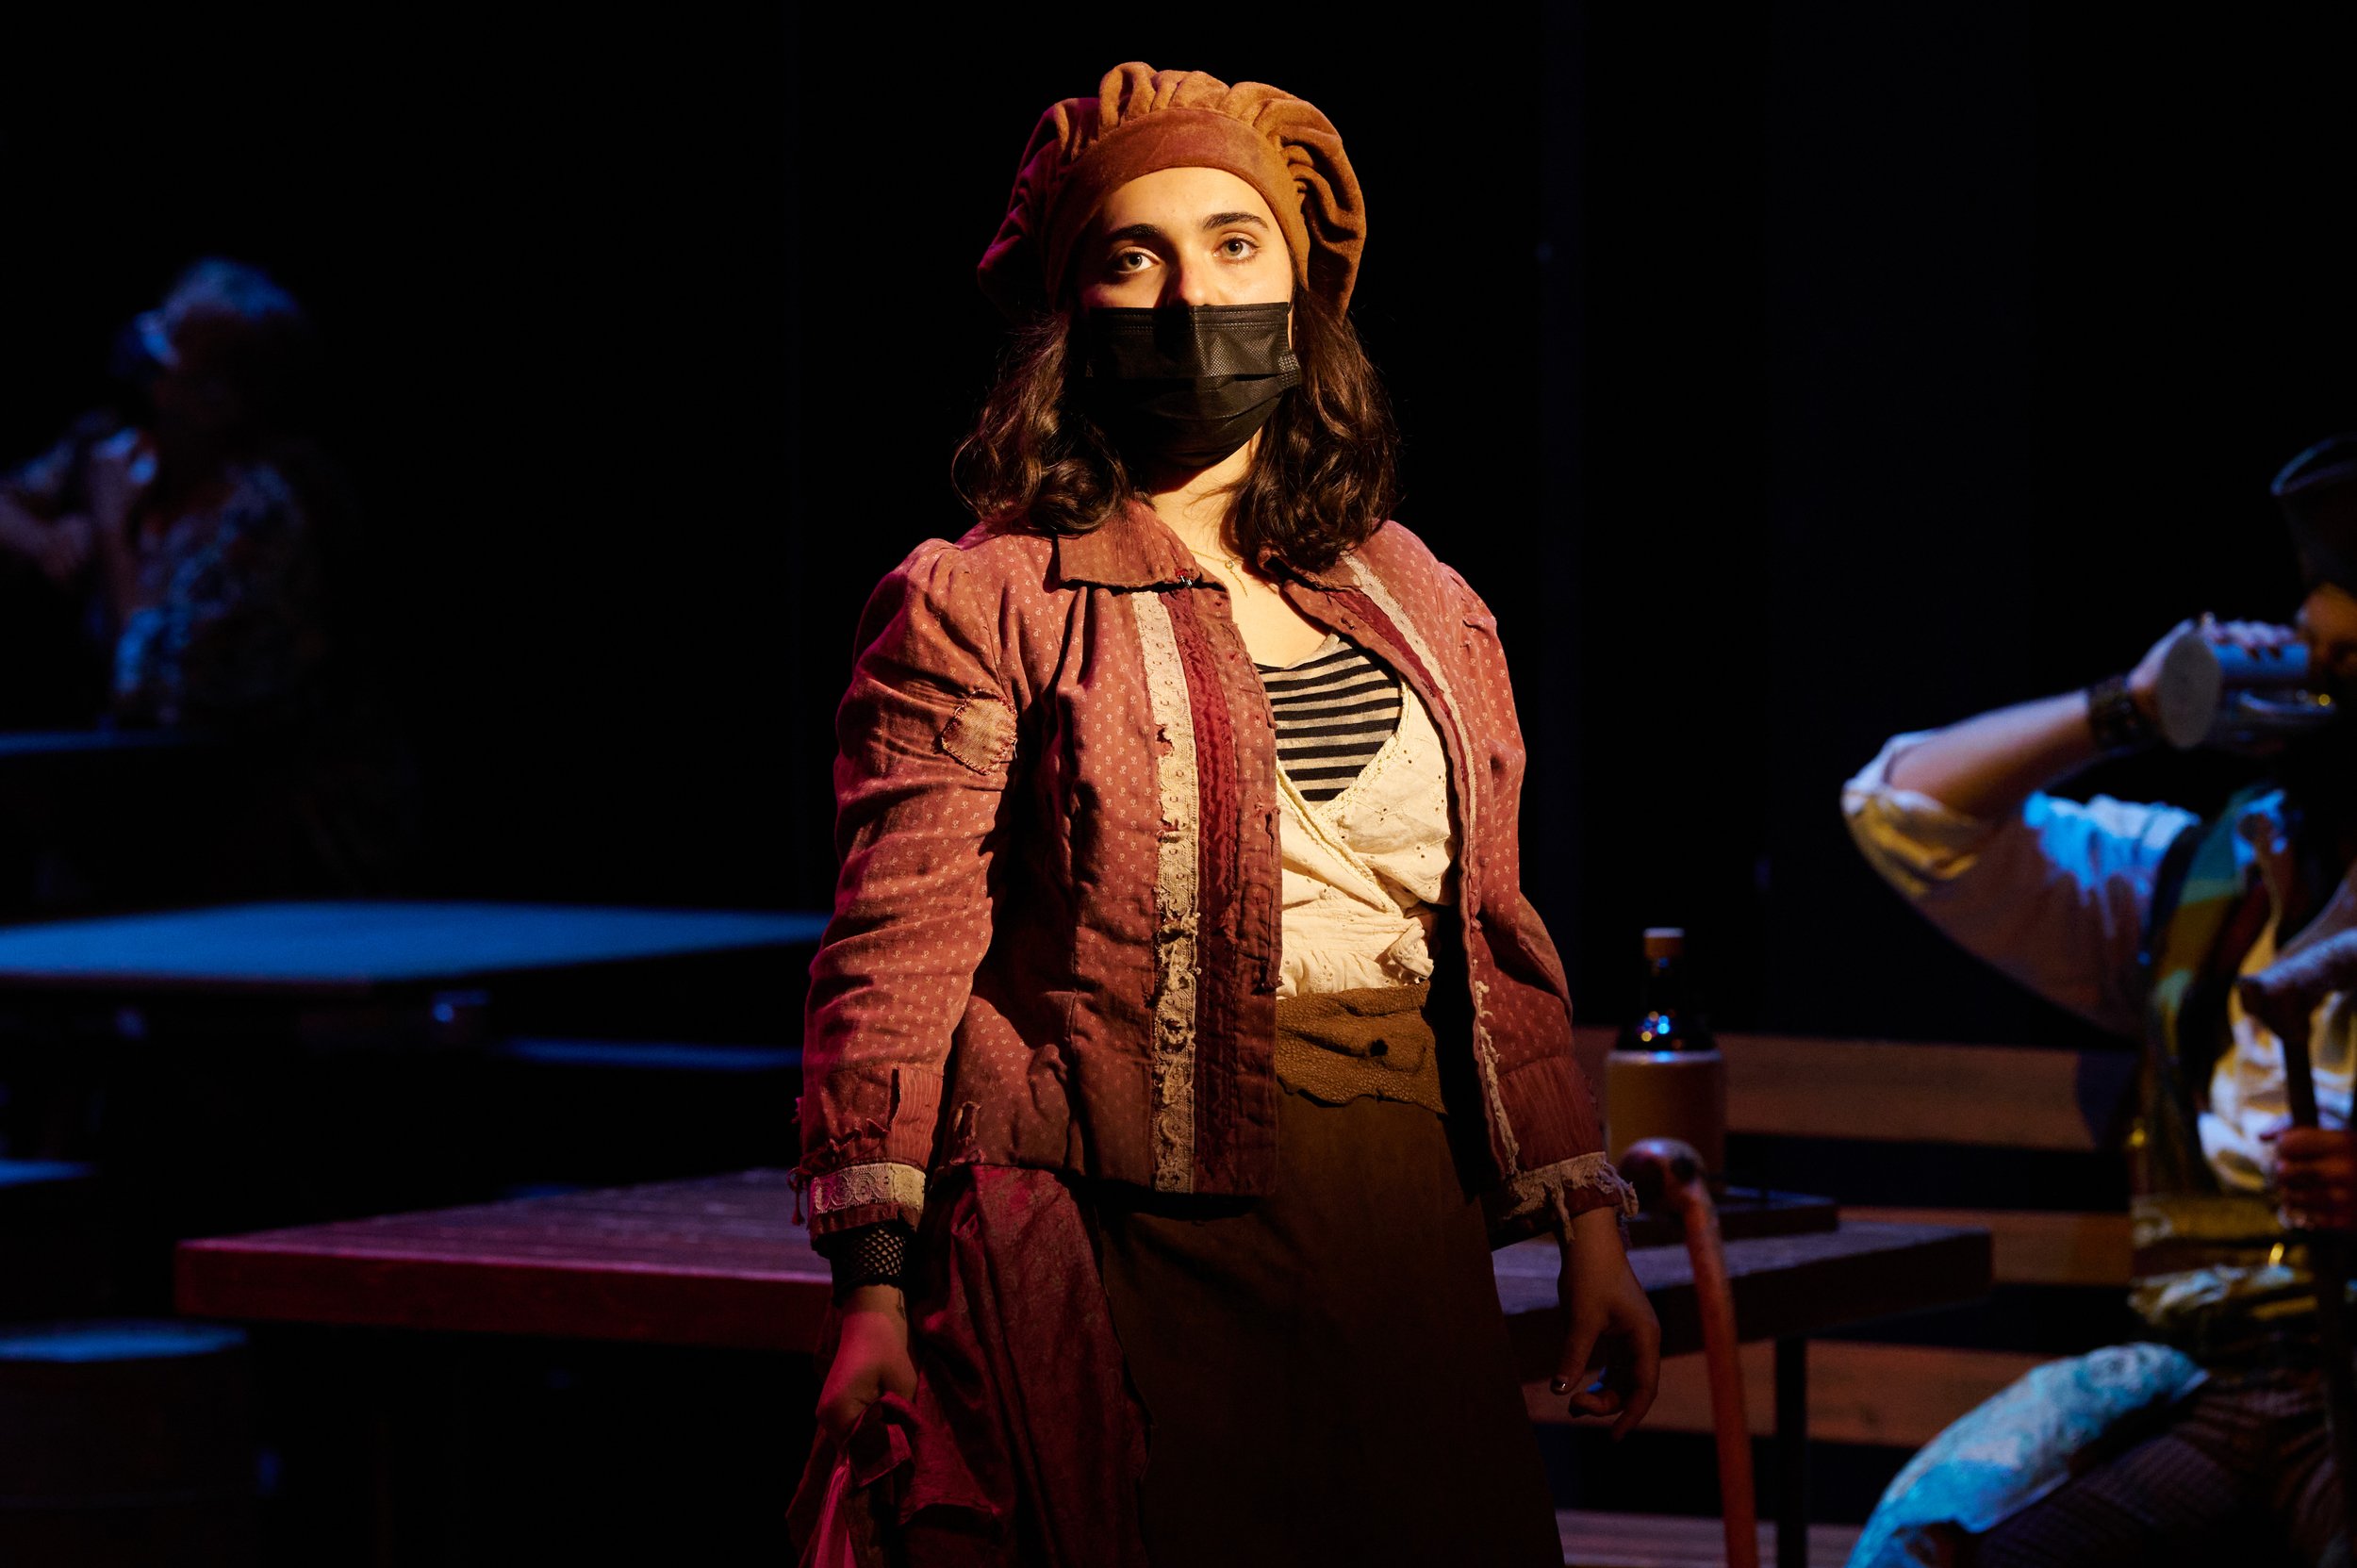  Justine Marin during rehearsal of the Santa Monica College Theatre Arts production of "Treasure Island" at the SMC Main Stage on Tuesday, May 17, 2022, in Santa Monica, Calif. (Nicholas McCall | The Corsair) 